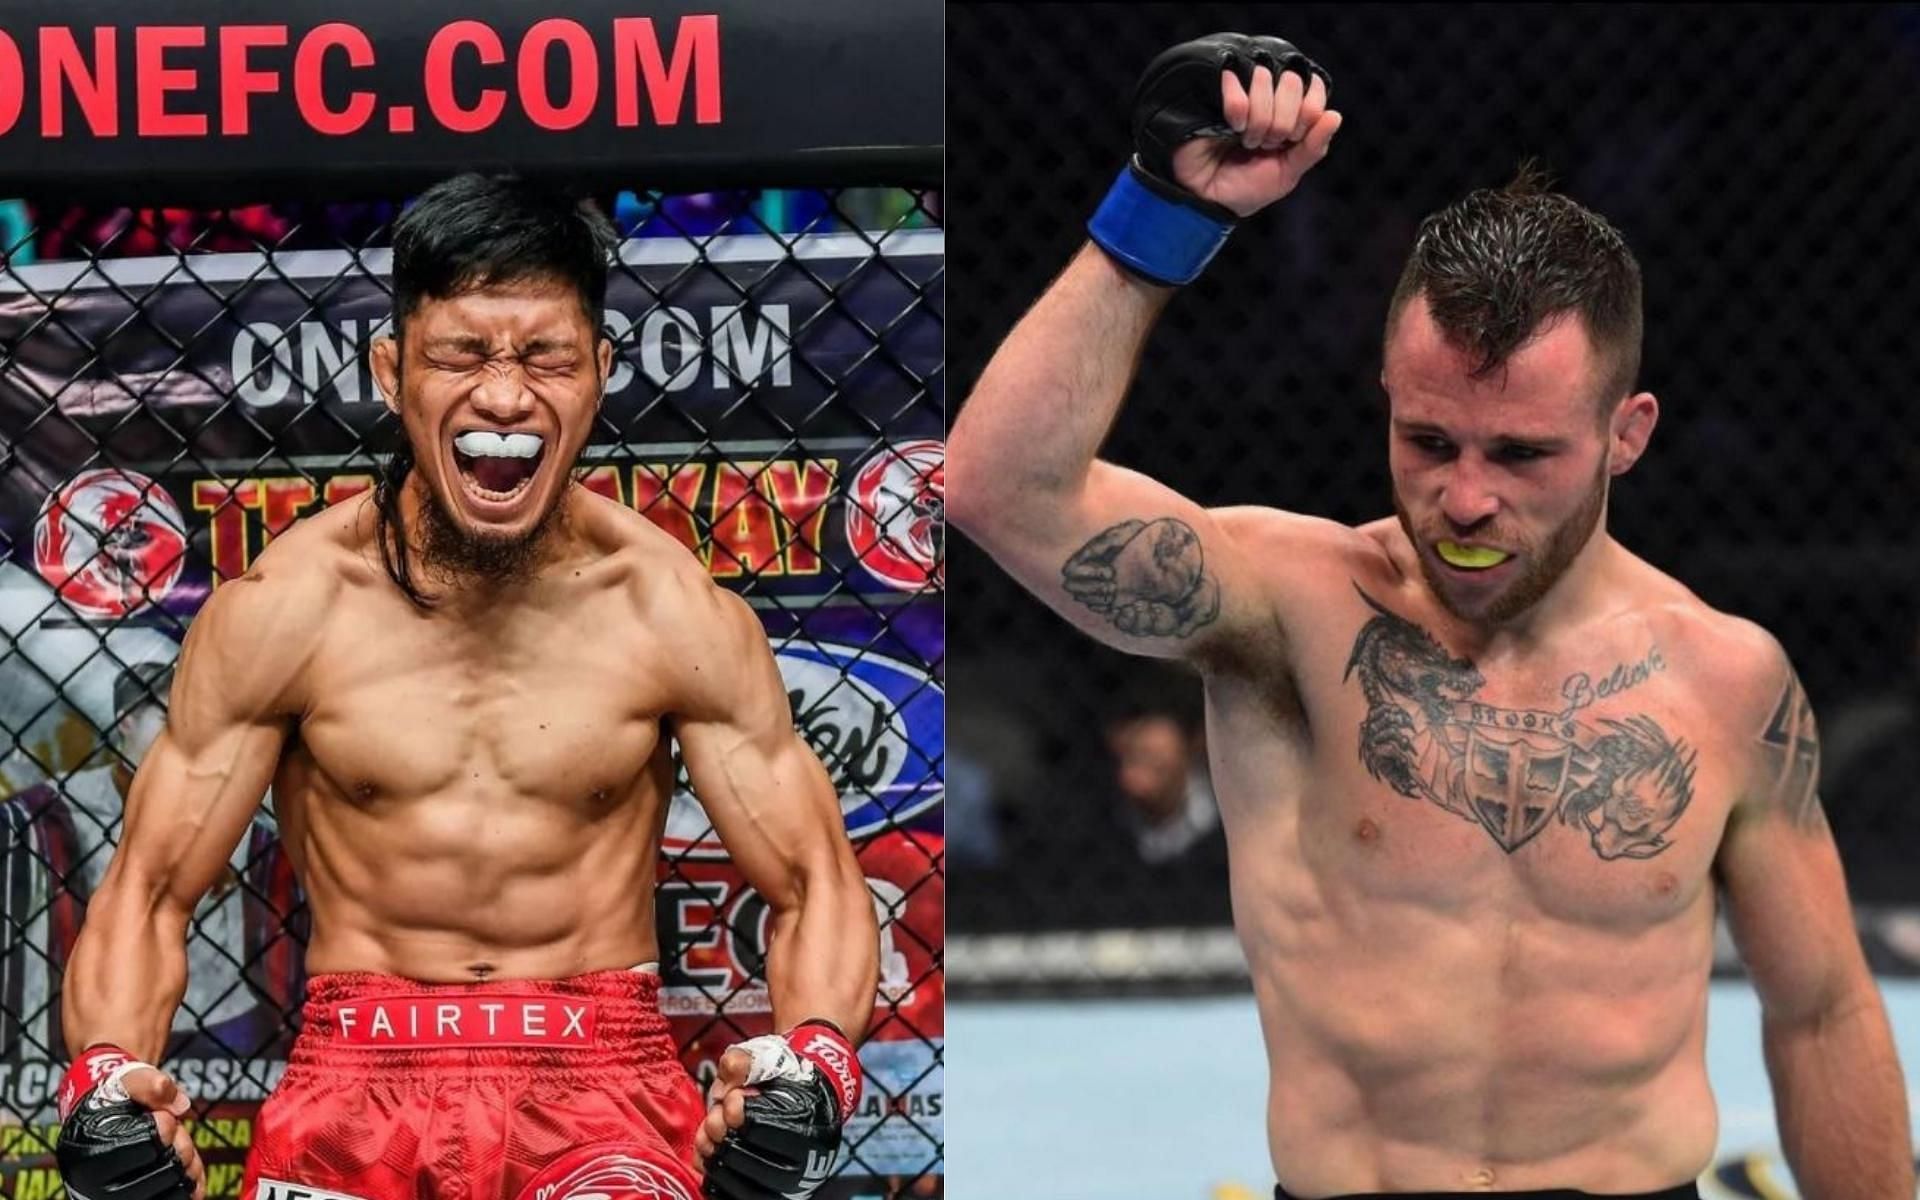 ONE Championship strawweight Lito Adiwang (left) and newcomer Jarred Brooks (right) will clash on November 26 at ONE: NEXTGEN III. (Images credit: @litoadiwang and @the_monkeygod on Instagram)